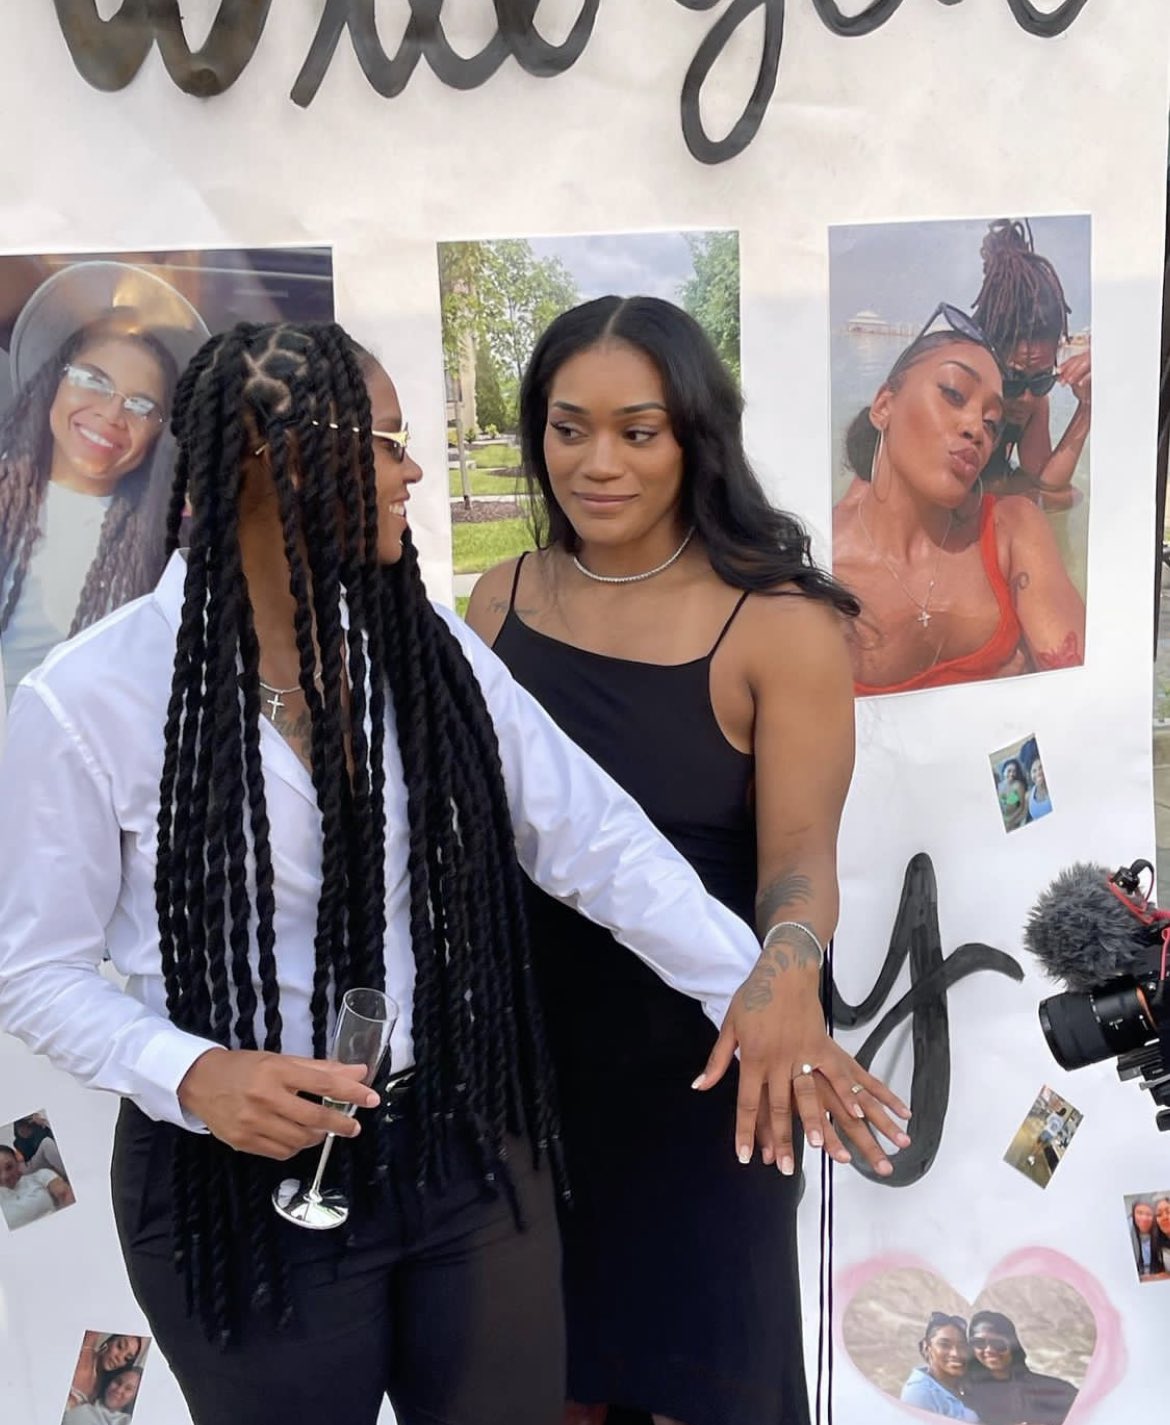 Victoria Vivians of the Indiana Pacers and Tierra Ruffin-Pratt show off their engagement rings.